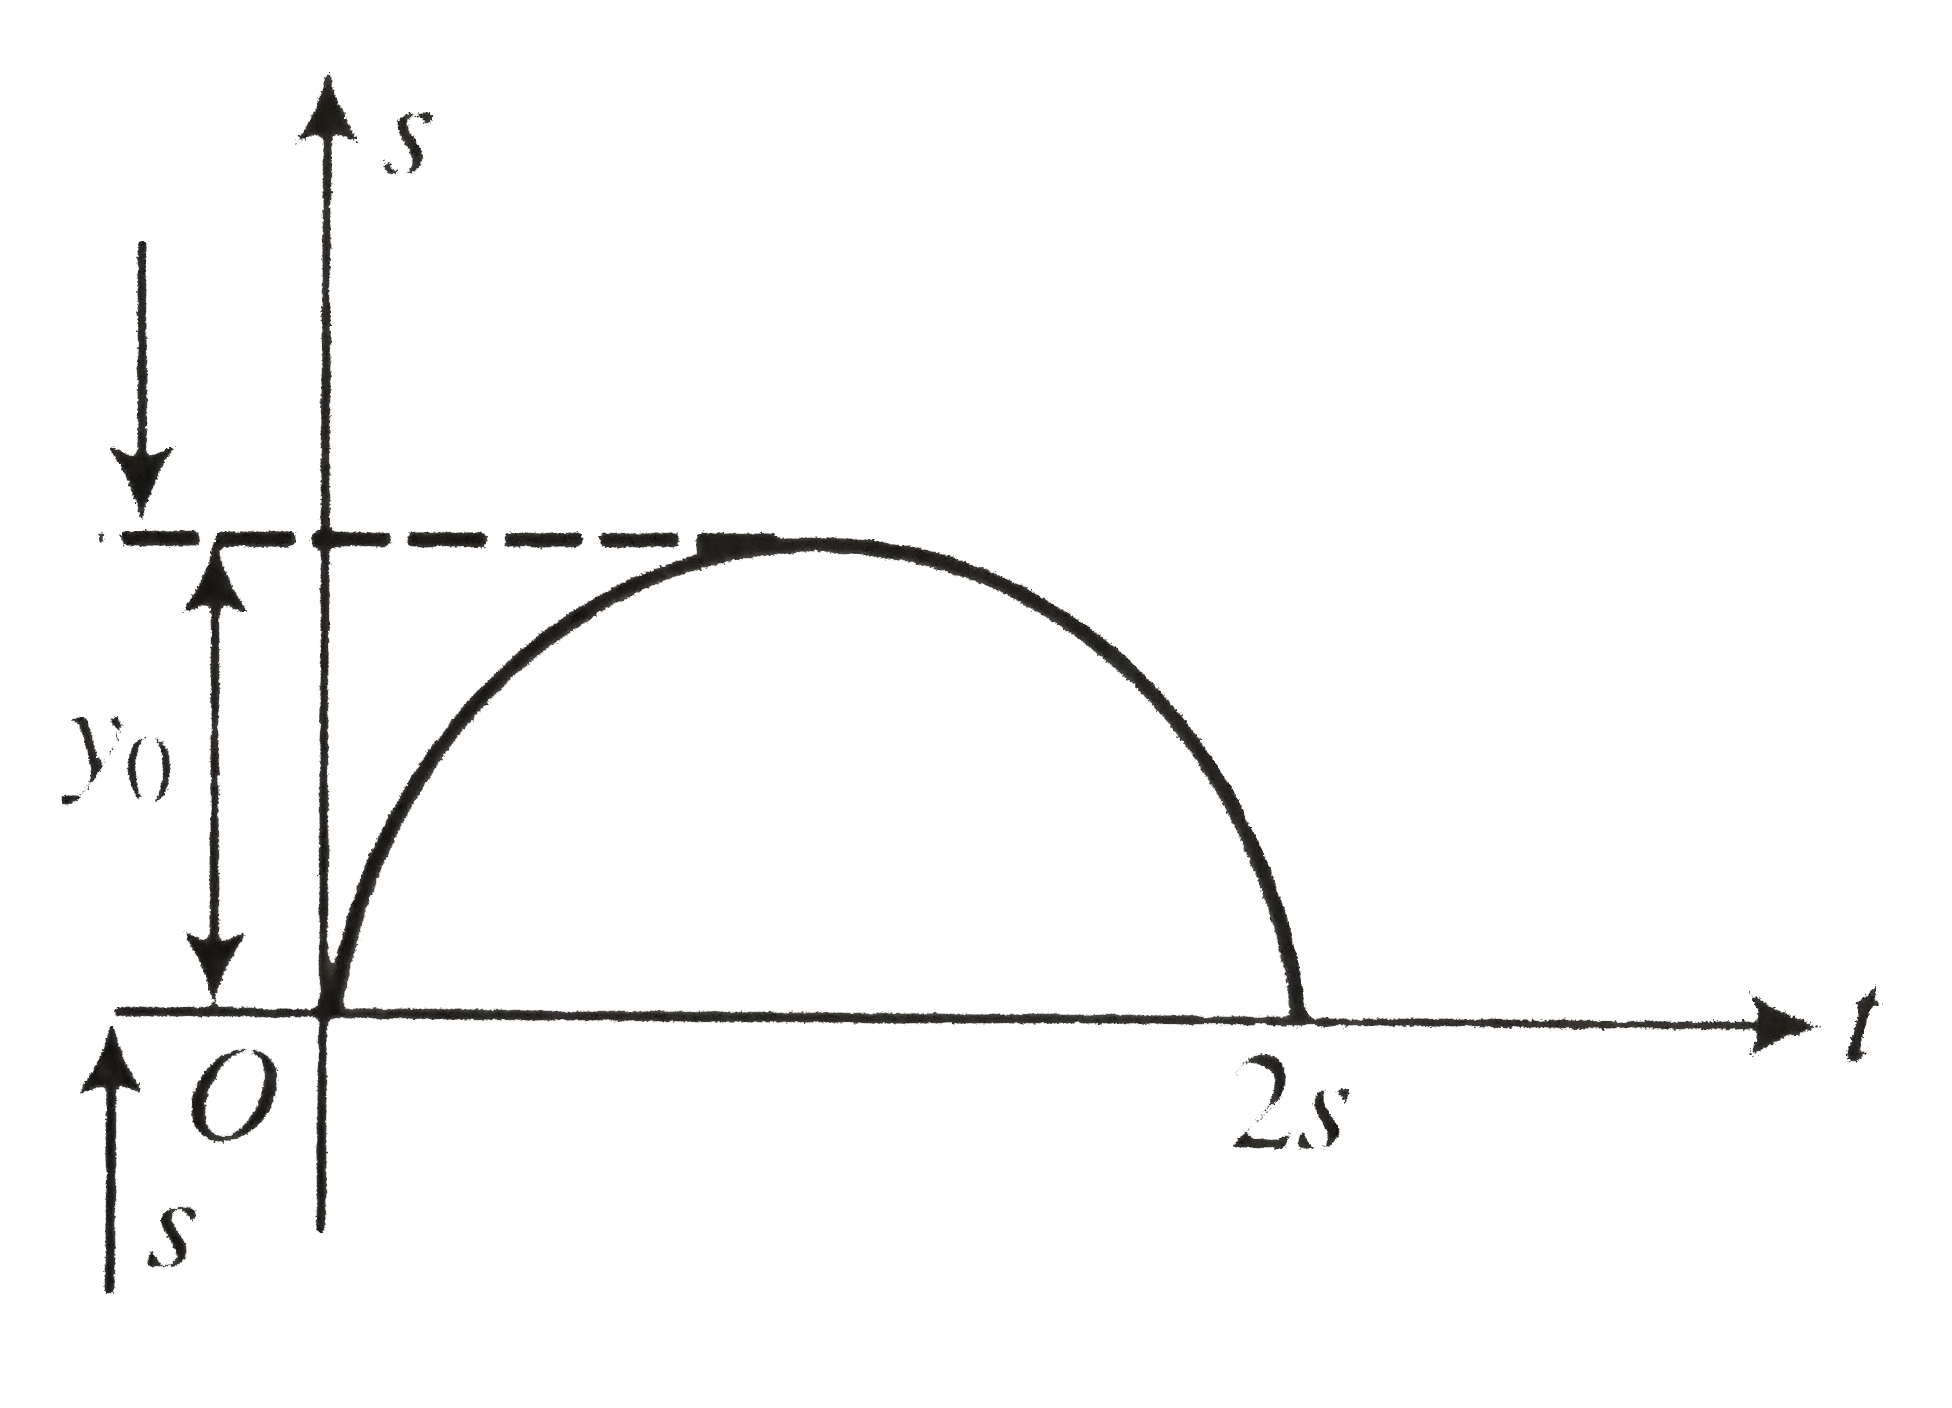 A particle moves rectilinearly possessing a parabolic s-t graph. Find the average velocity of the particle over a time interval from t = 1/2 s to t = 1.5 s.